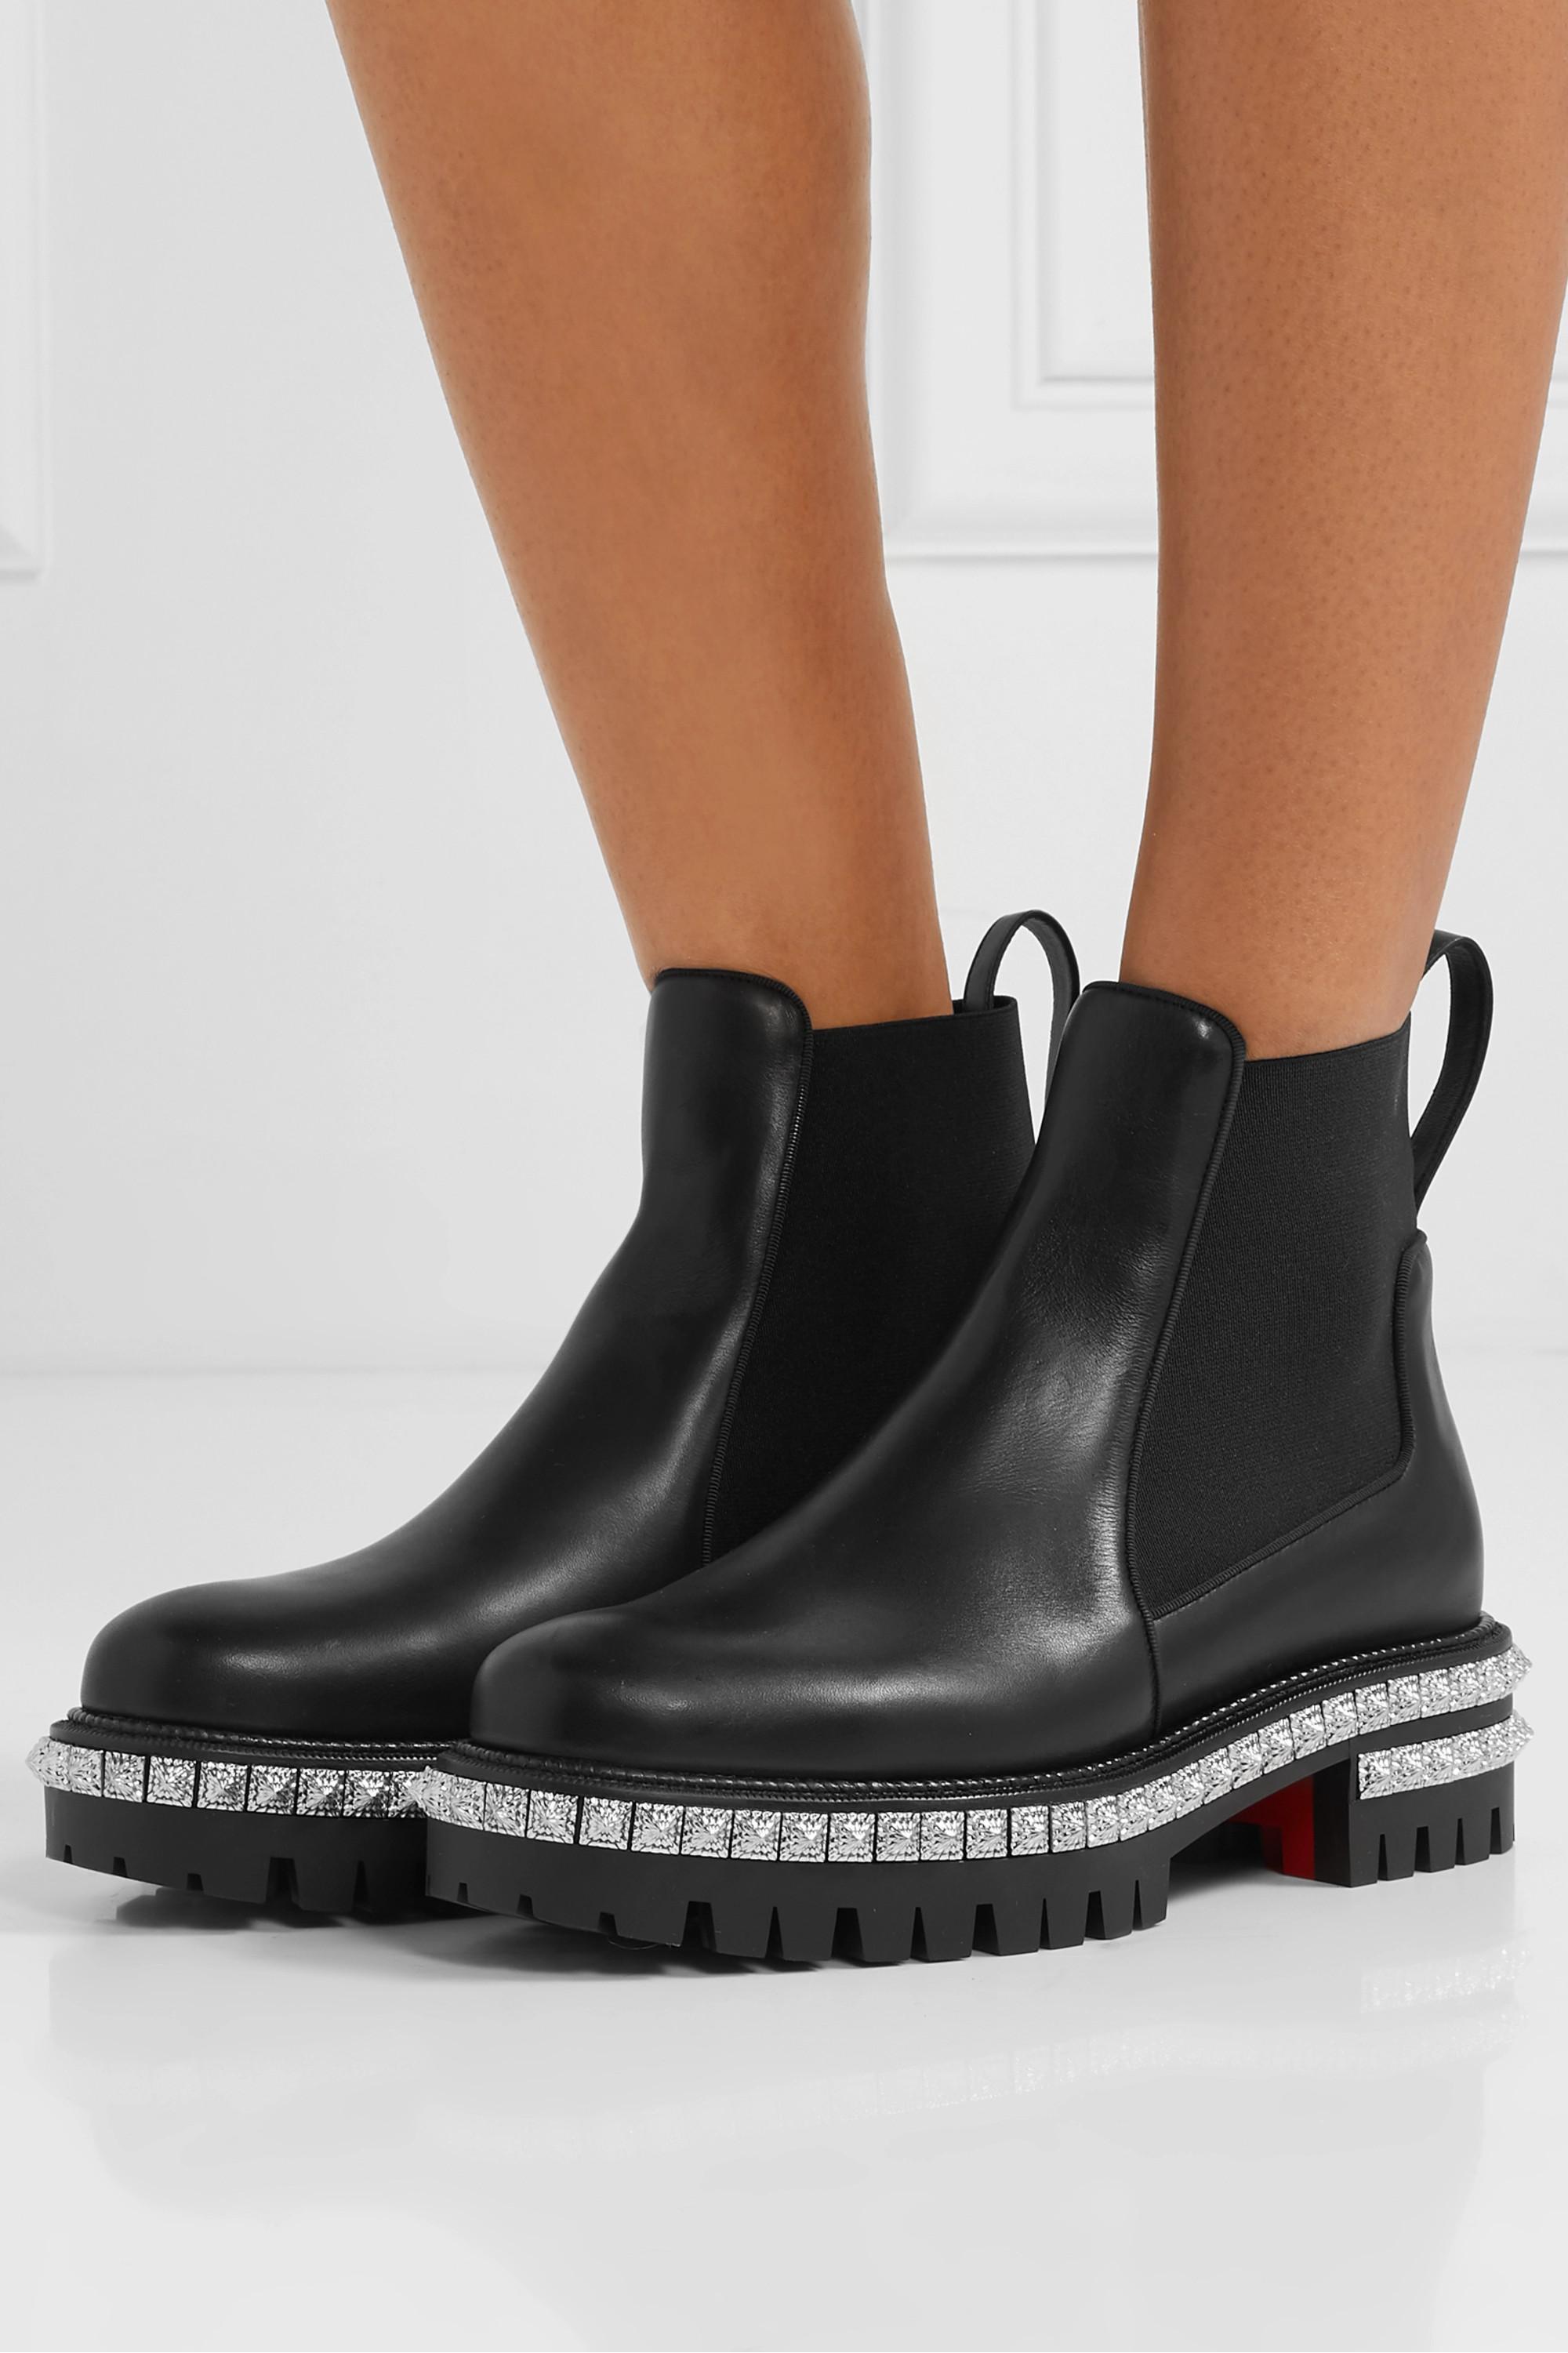 Christian Louboutin By The River Leather Boot in Black | Lyst